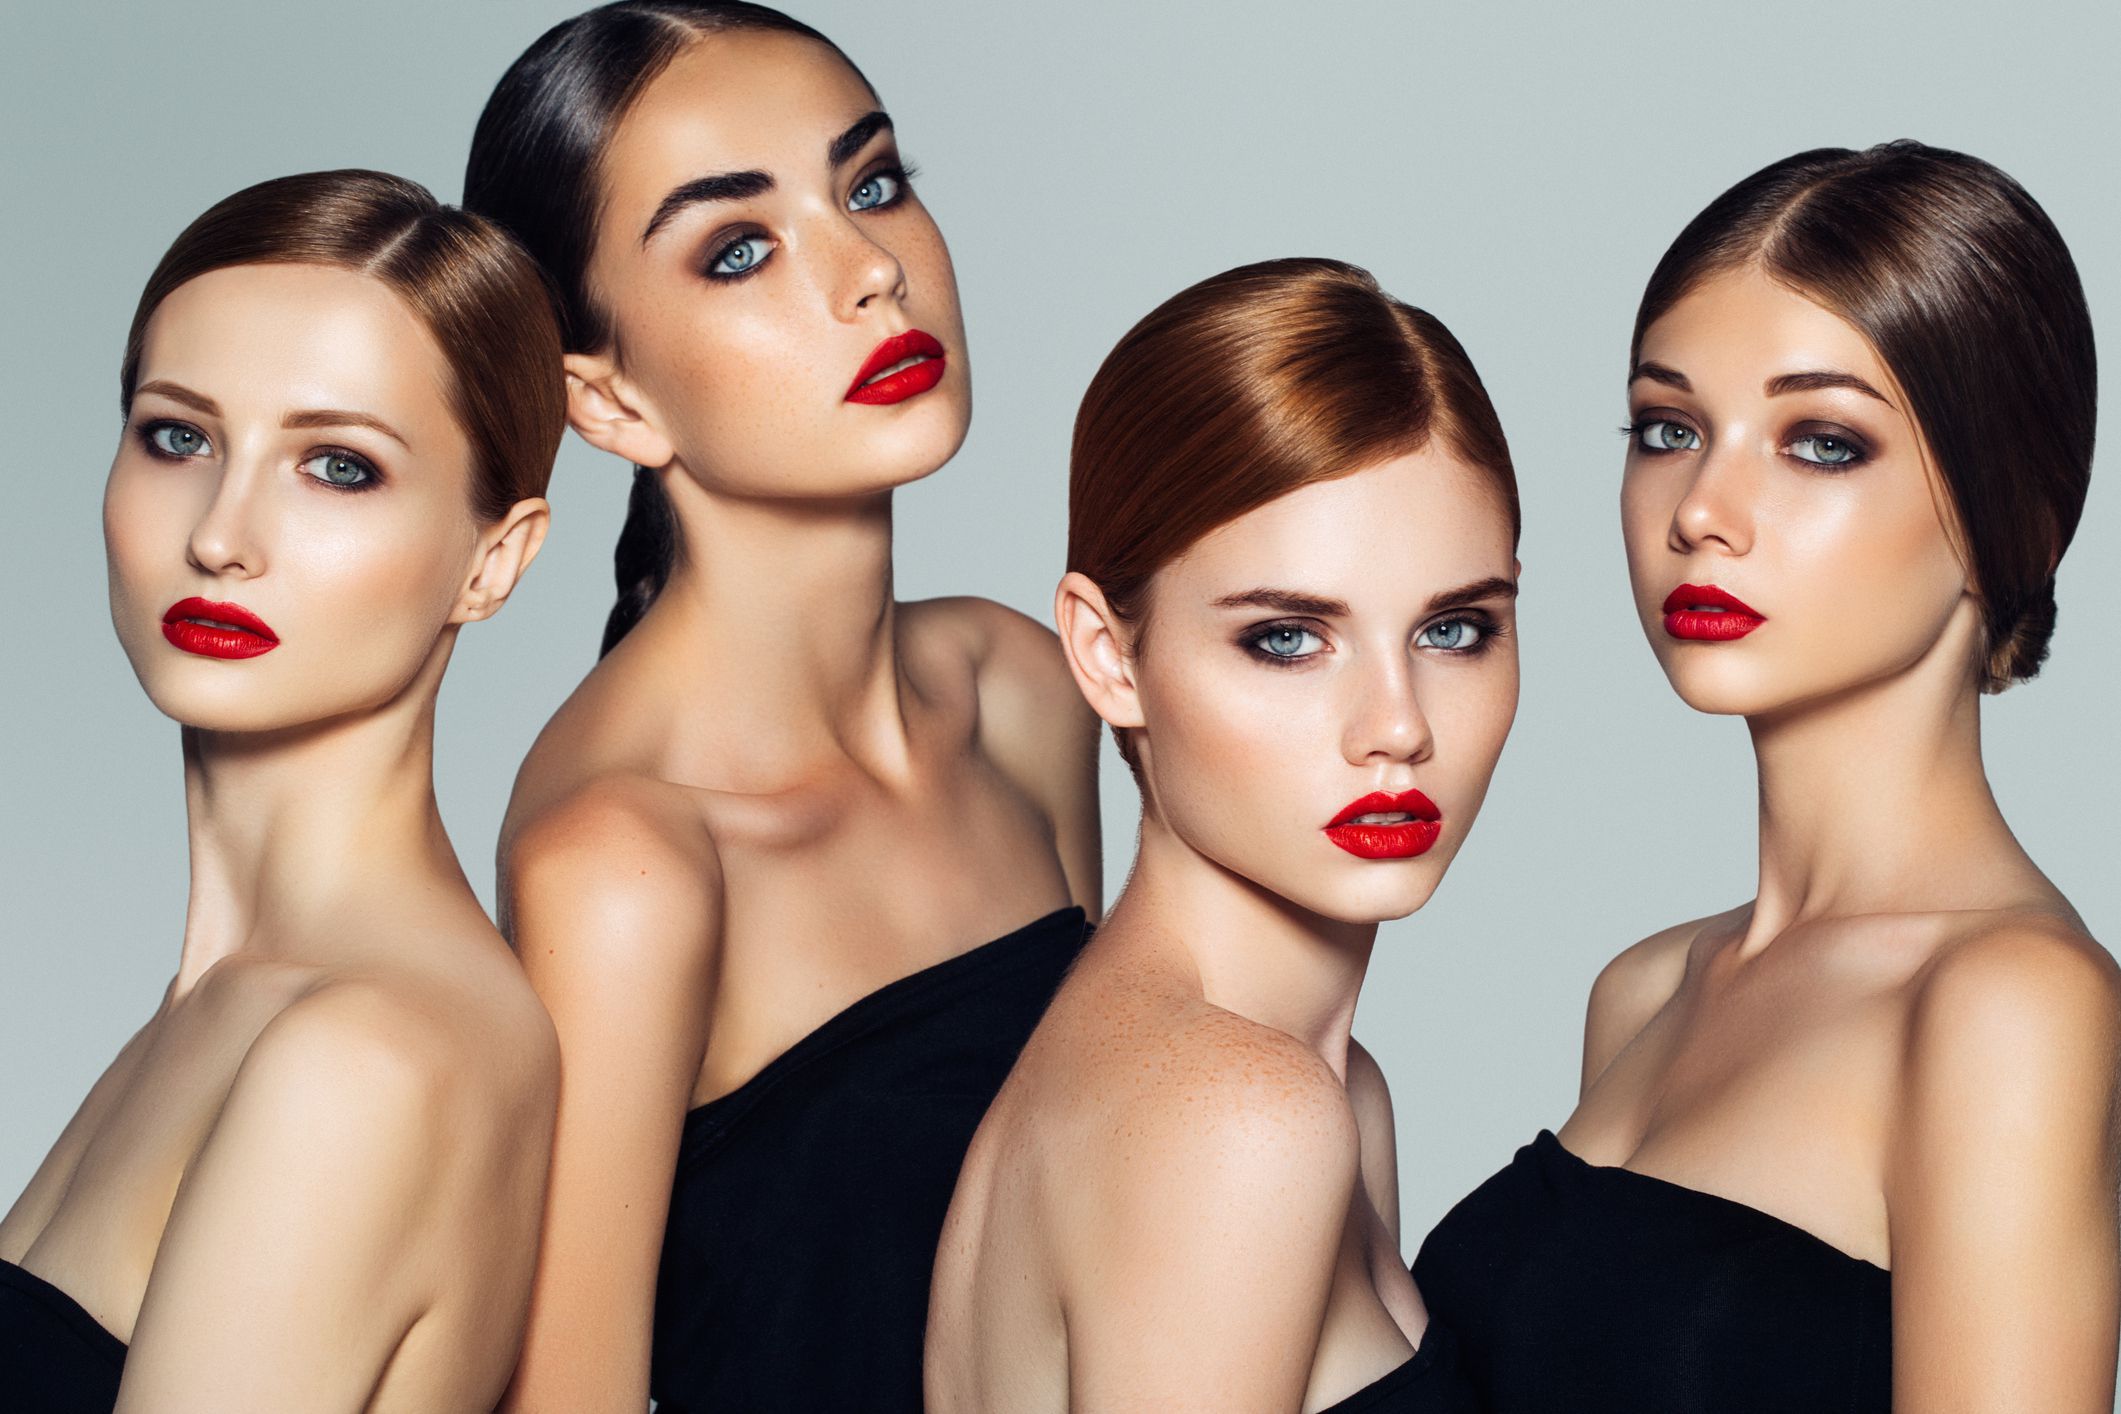 The Top Female Modeling Agencies in New York